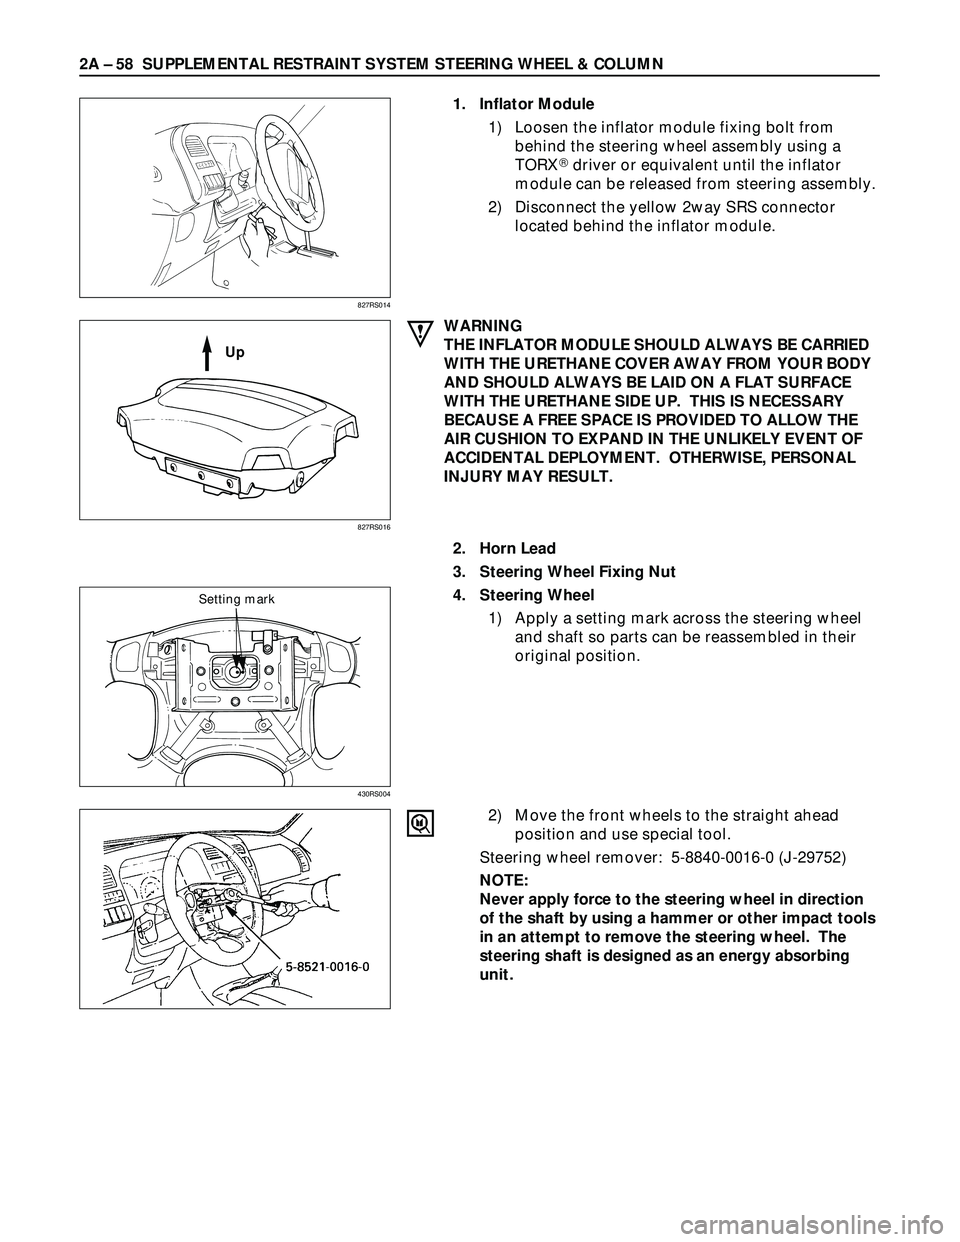 ISUZU TROOPER 1998  Service Repair Manual 2A – 58 SUPPLEMENTAL RESTRAINT SYSTEM STEERING WHEEL & COLUMN
1. Inflator Module
1) Loosen the inflator module fixing bolt from
behind the steering wheel assembly using a
TORX
driver or equivalen